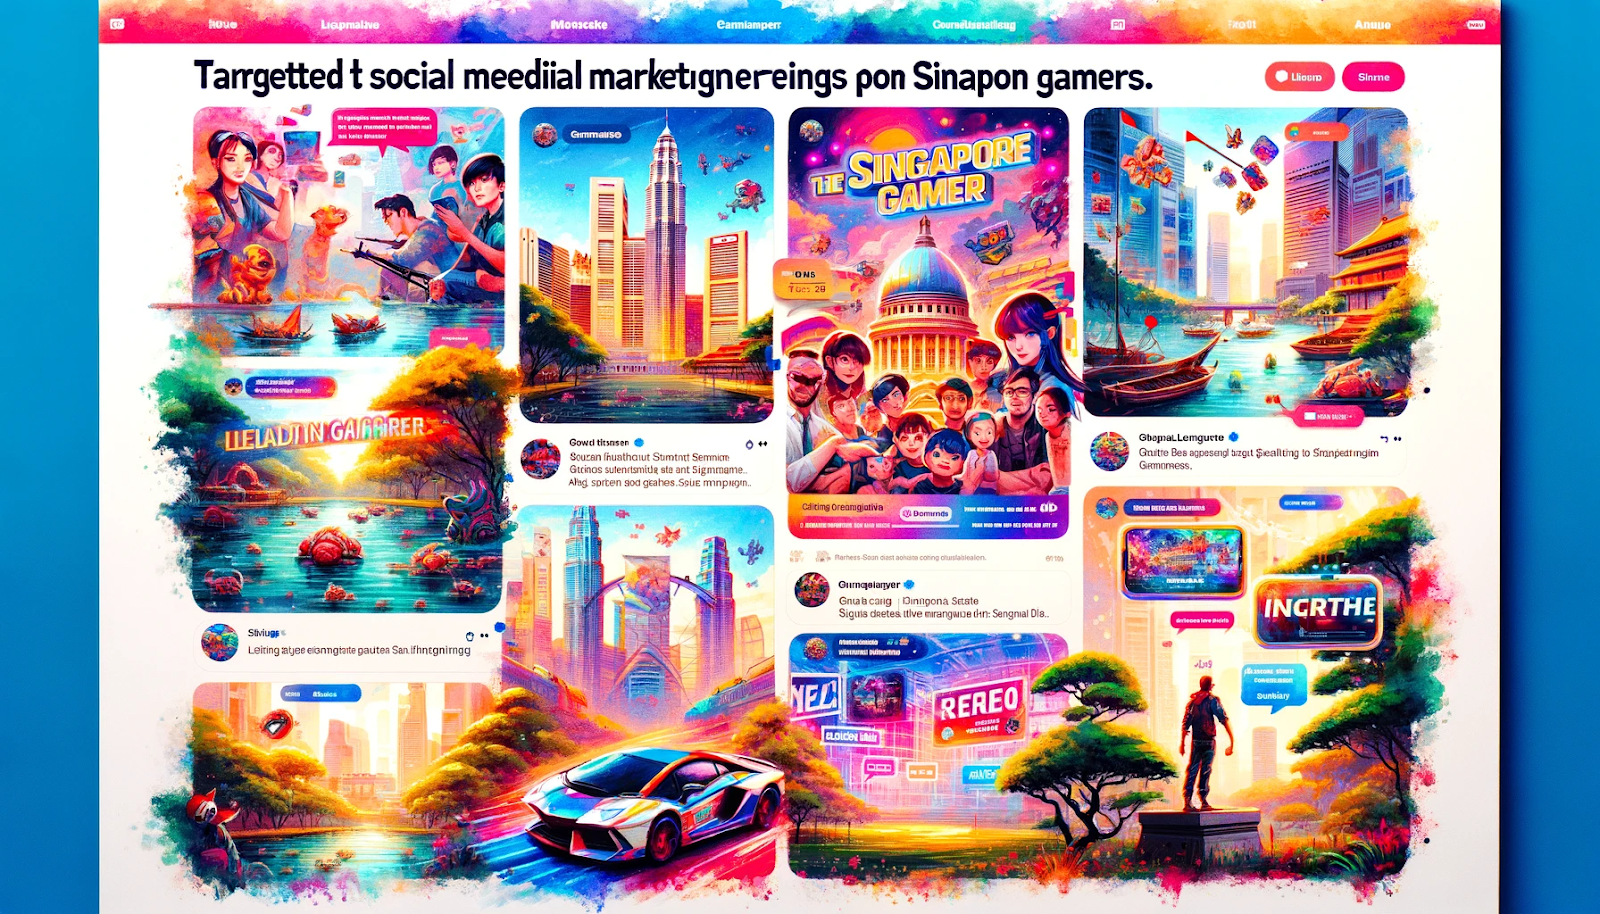 Game marketing strategies in singapore - A vibrant social media feed showcasing gaming ads and posts